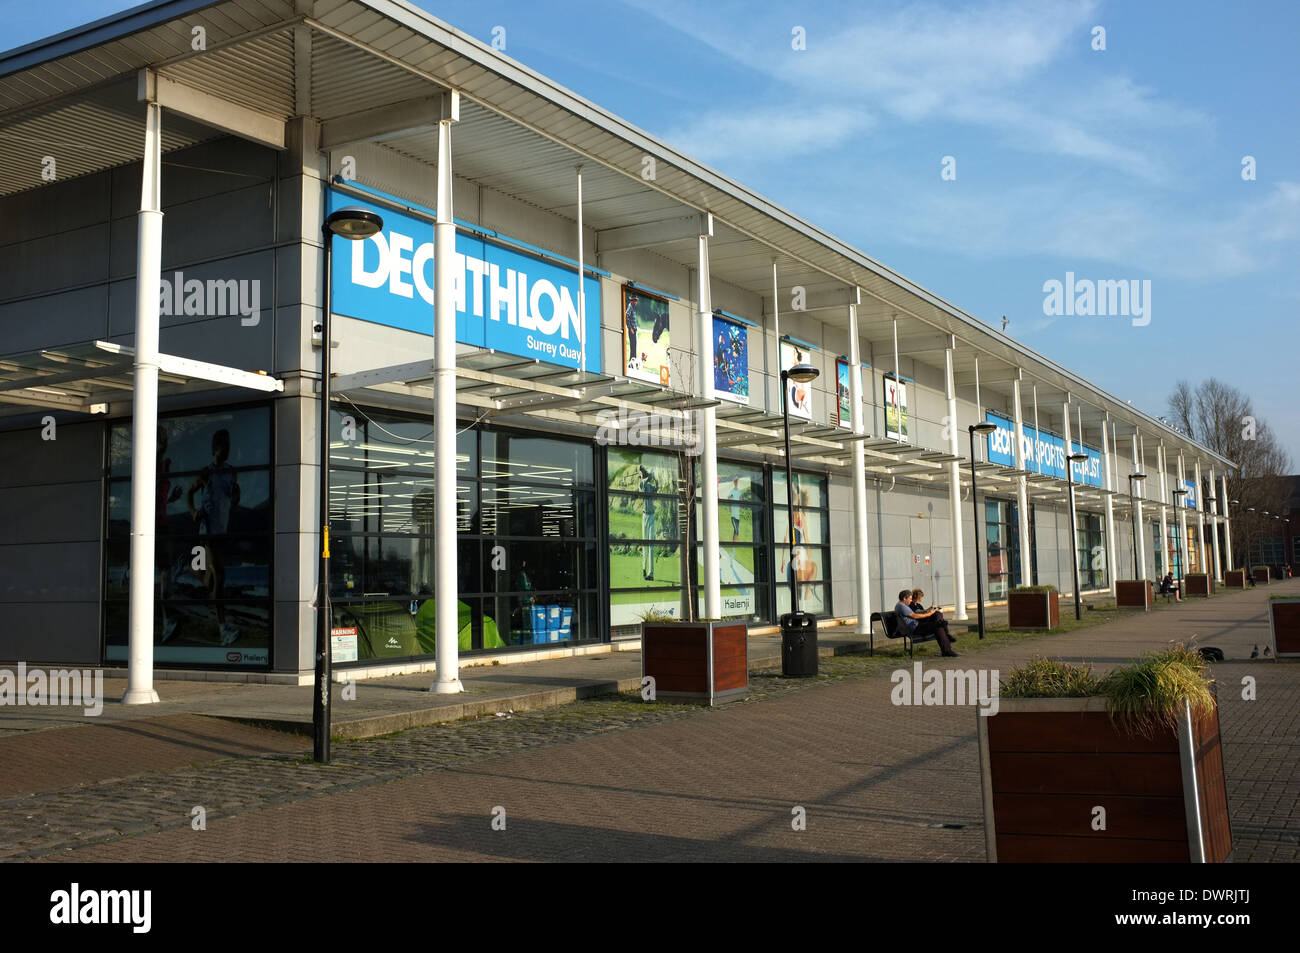 decathlon sports superstore located in 